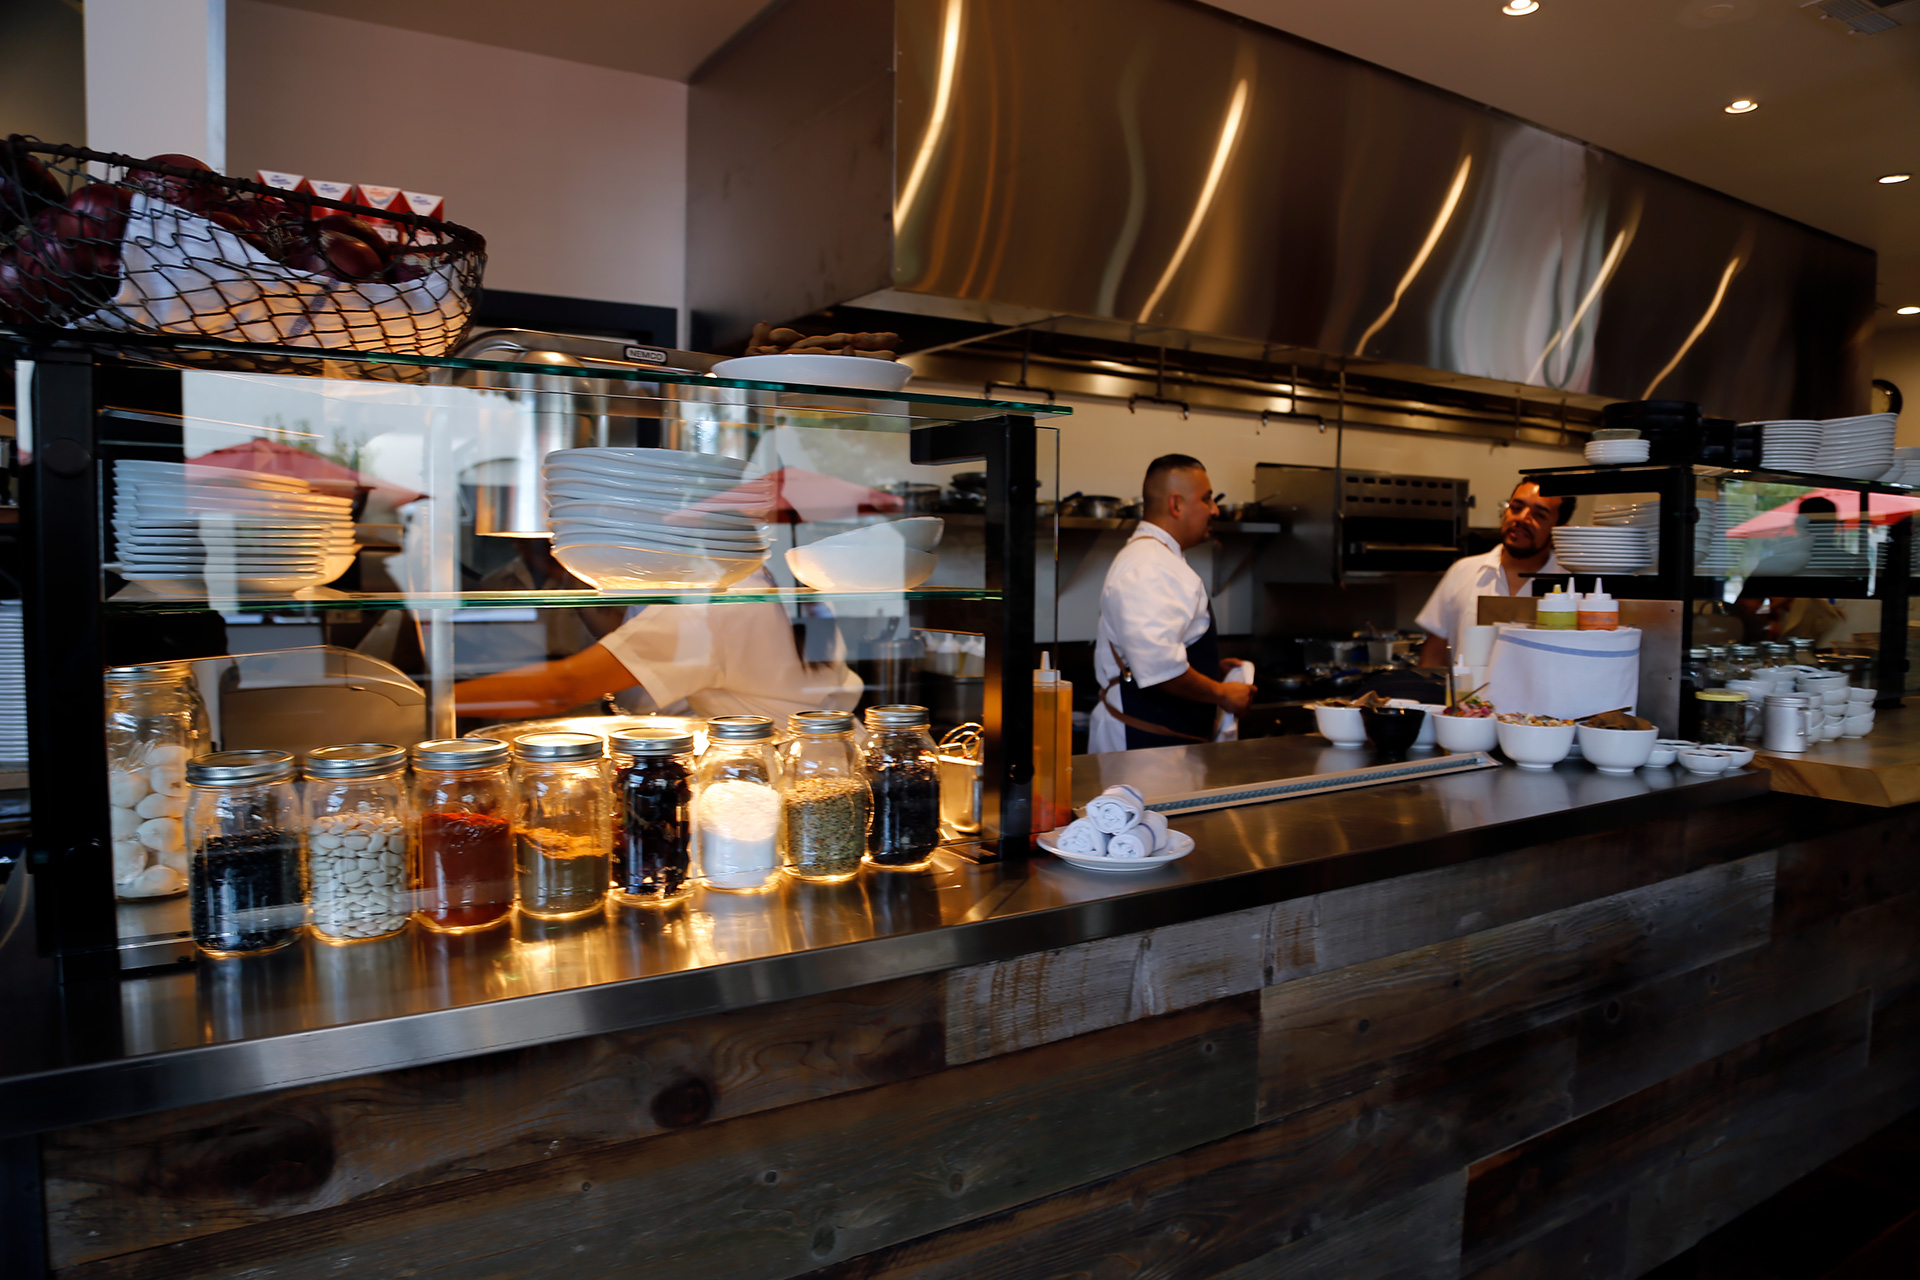 The open kitchen at Barranco.